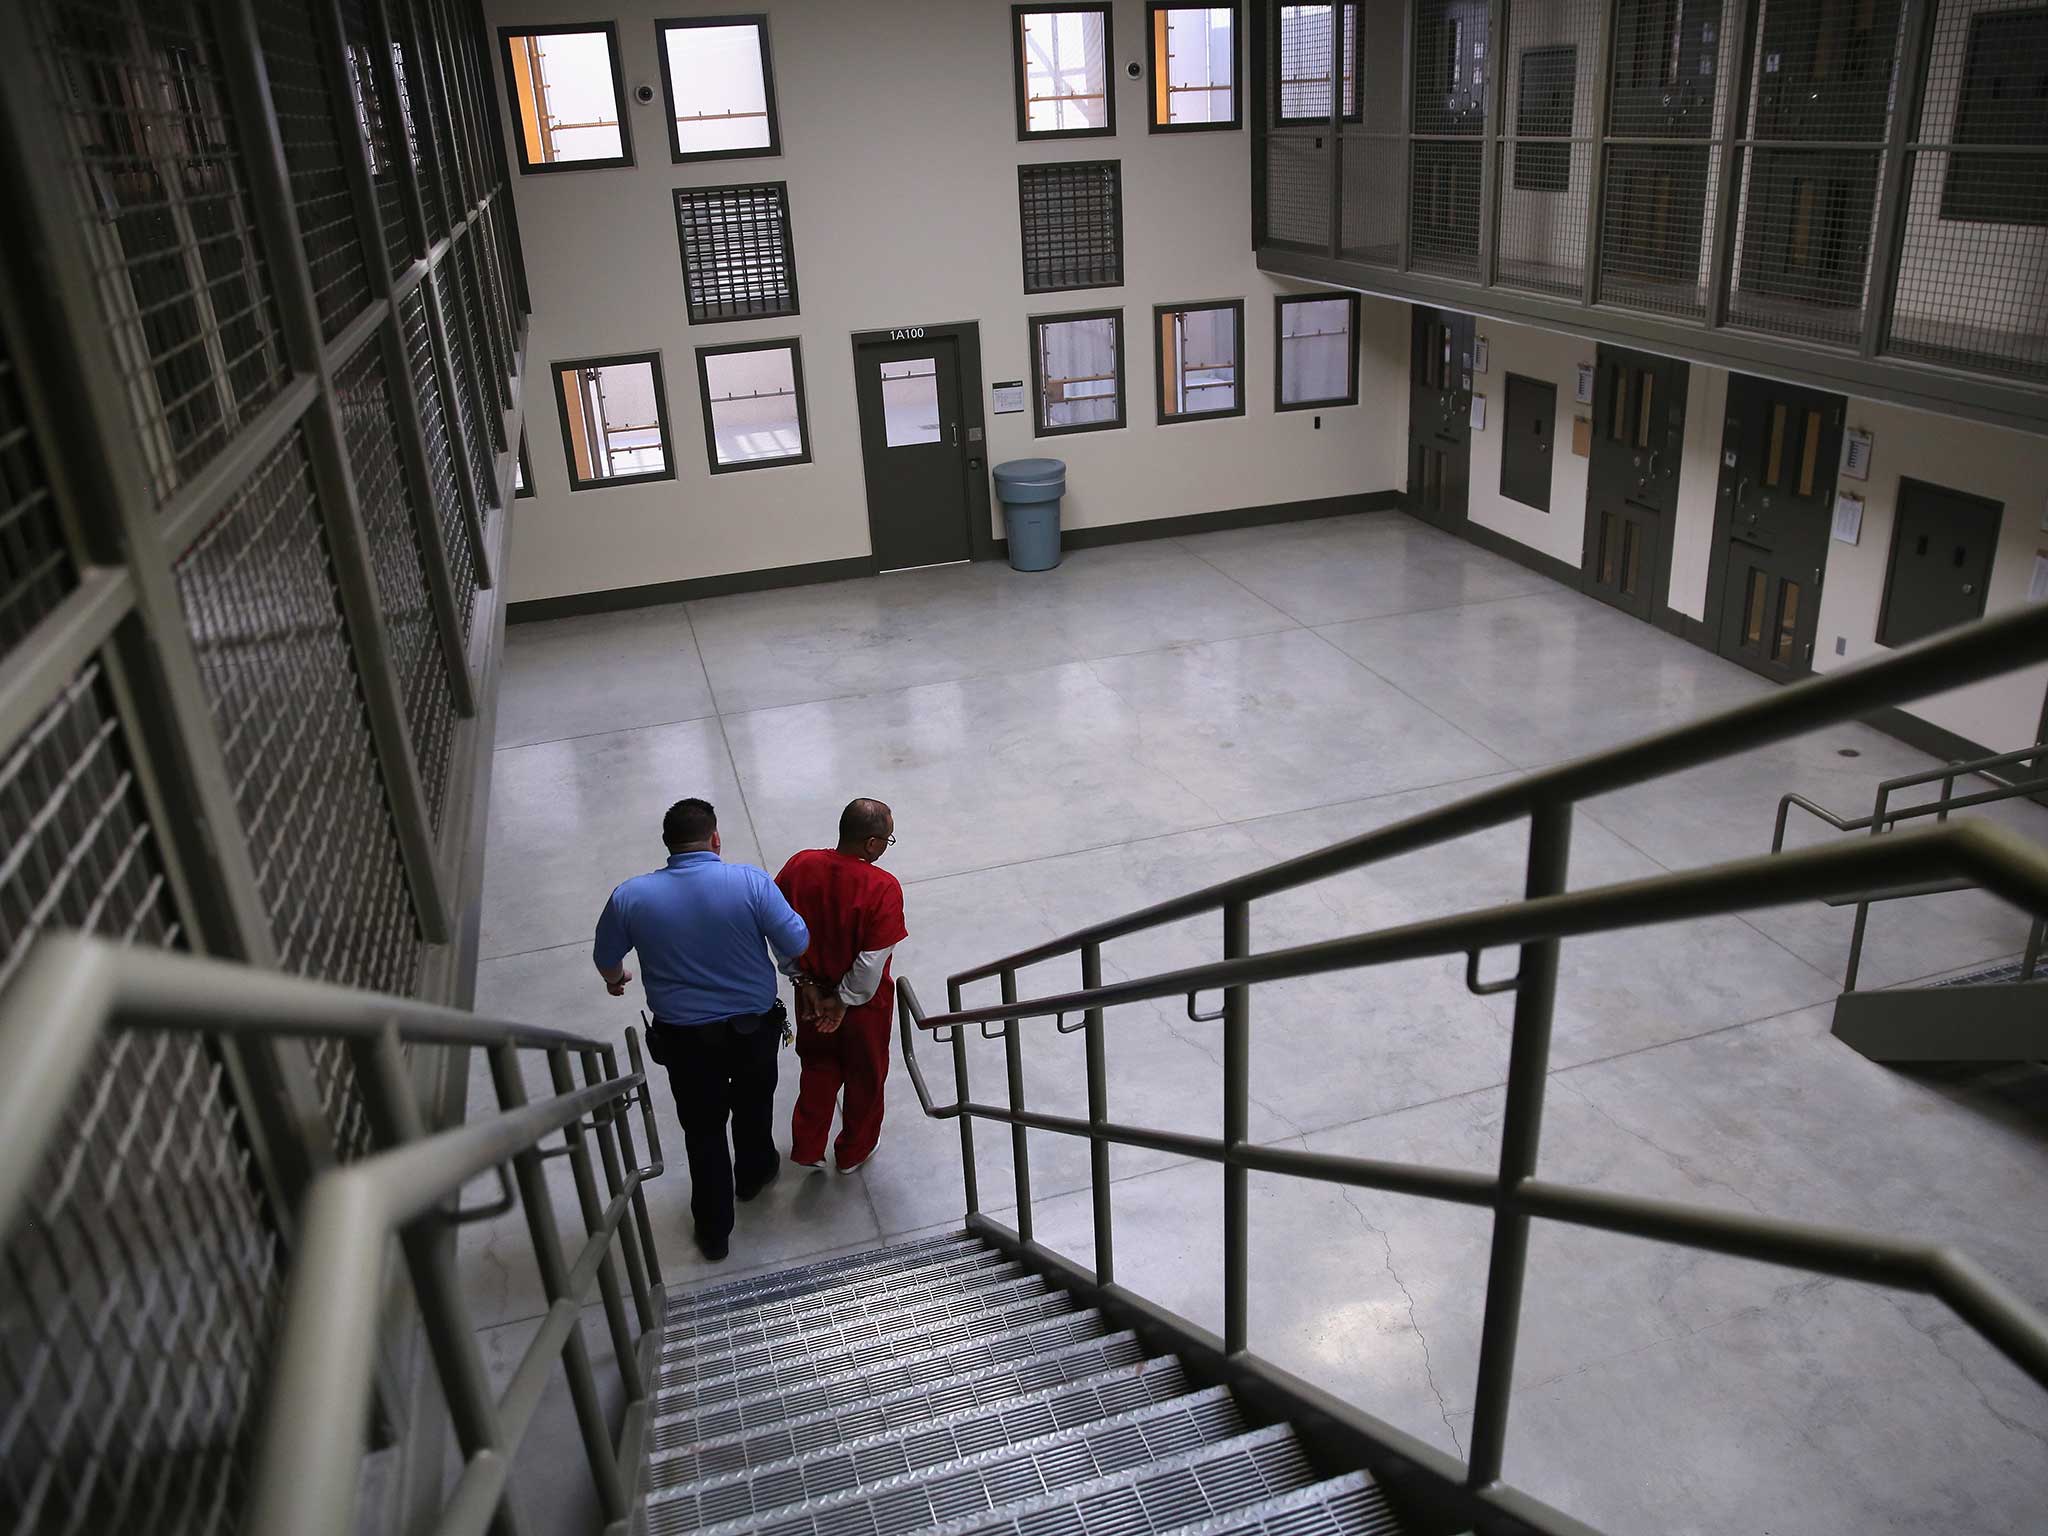 A prisoner is walked by a guard downstairs in one of California's state institutions